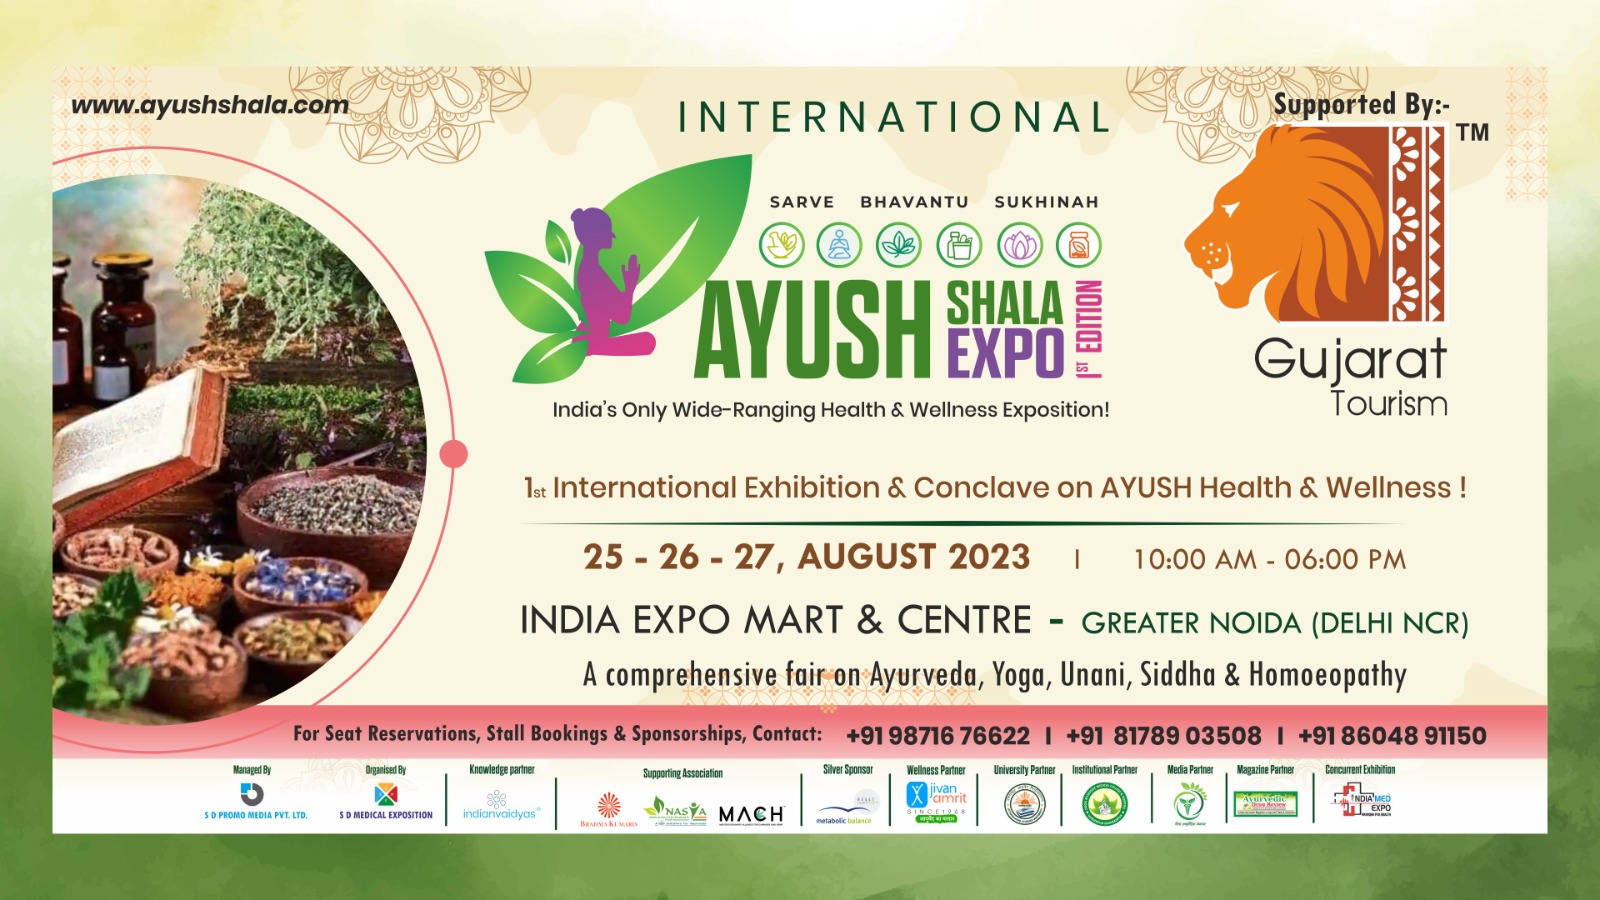 Ayushshala Expo & Conference has created full of excitement among Ayush & Wellness fraternity